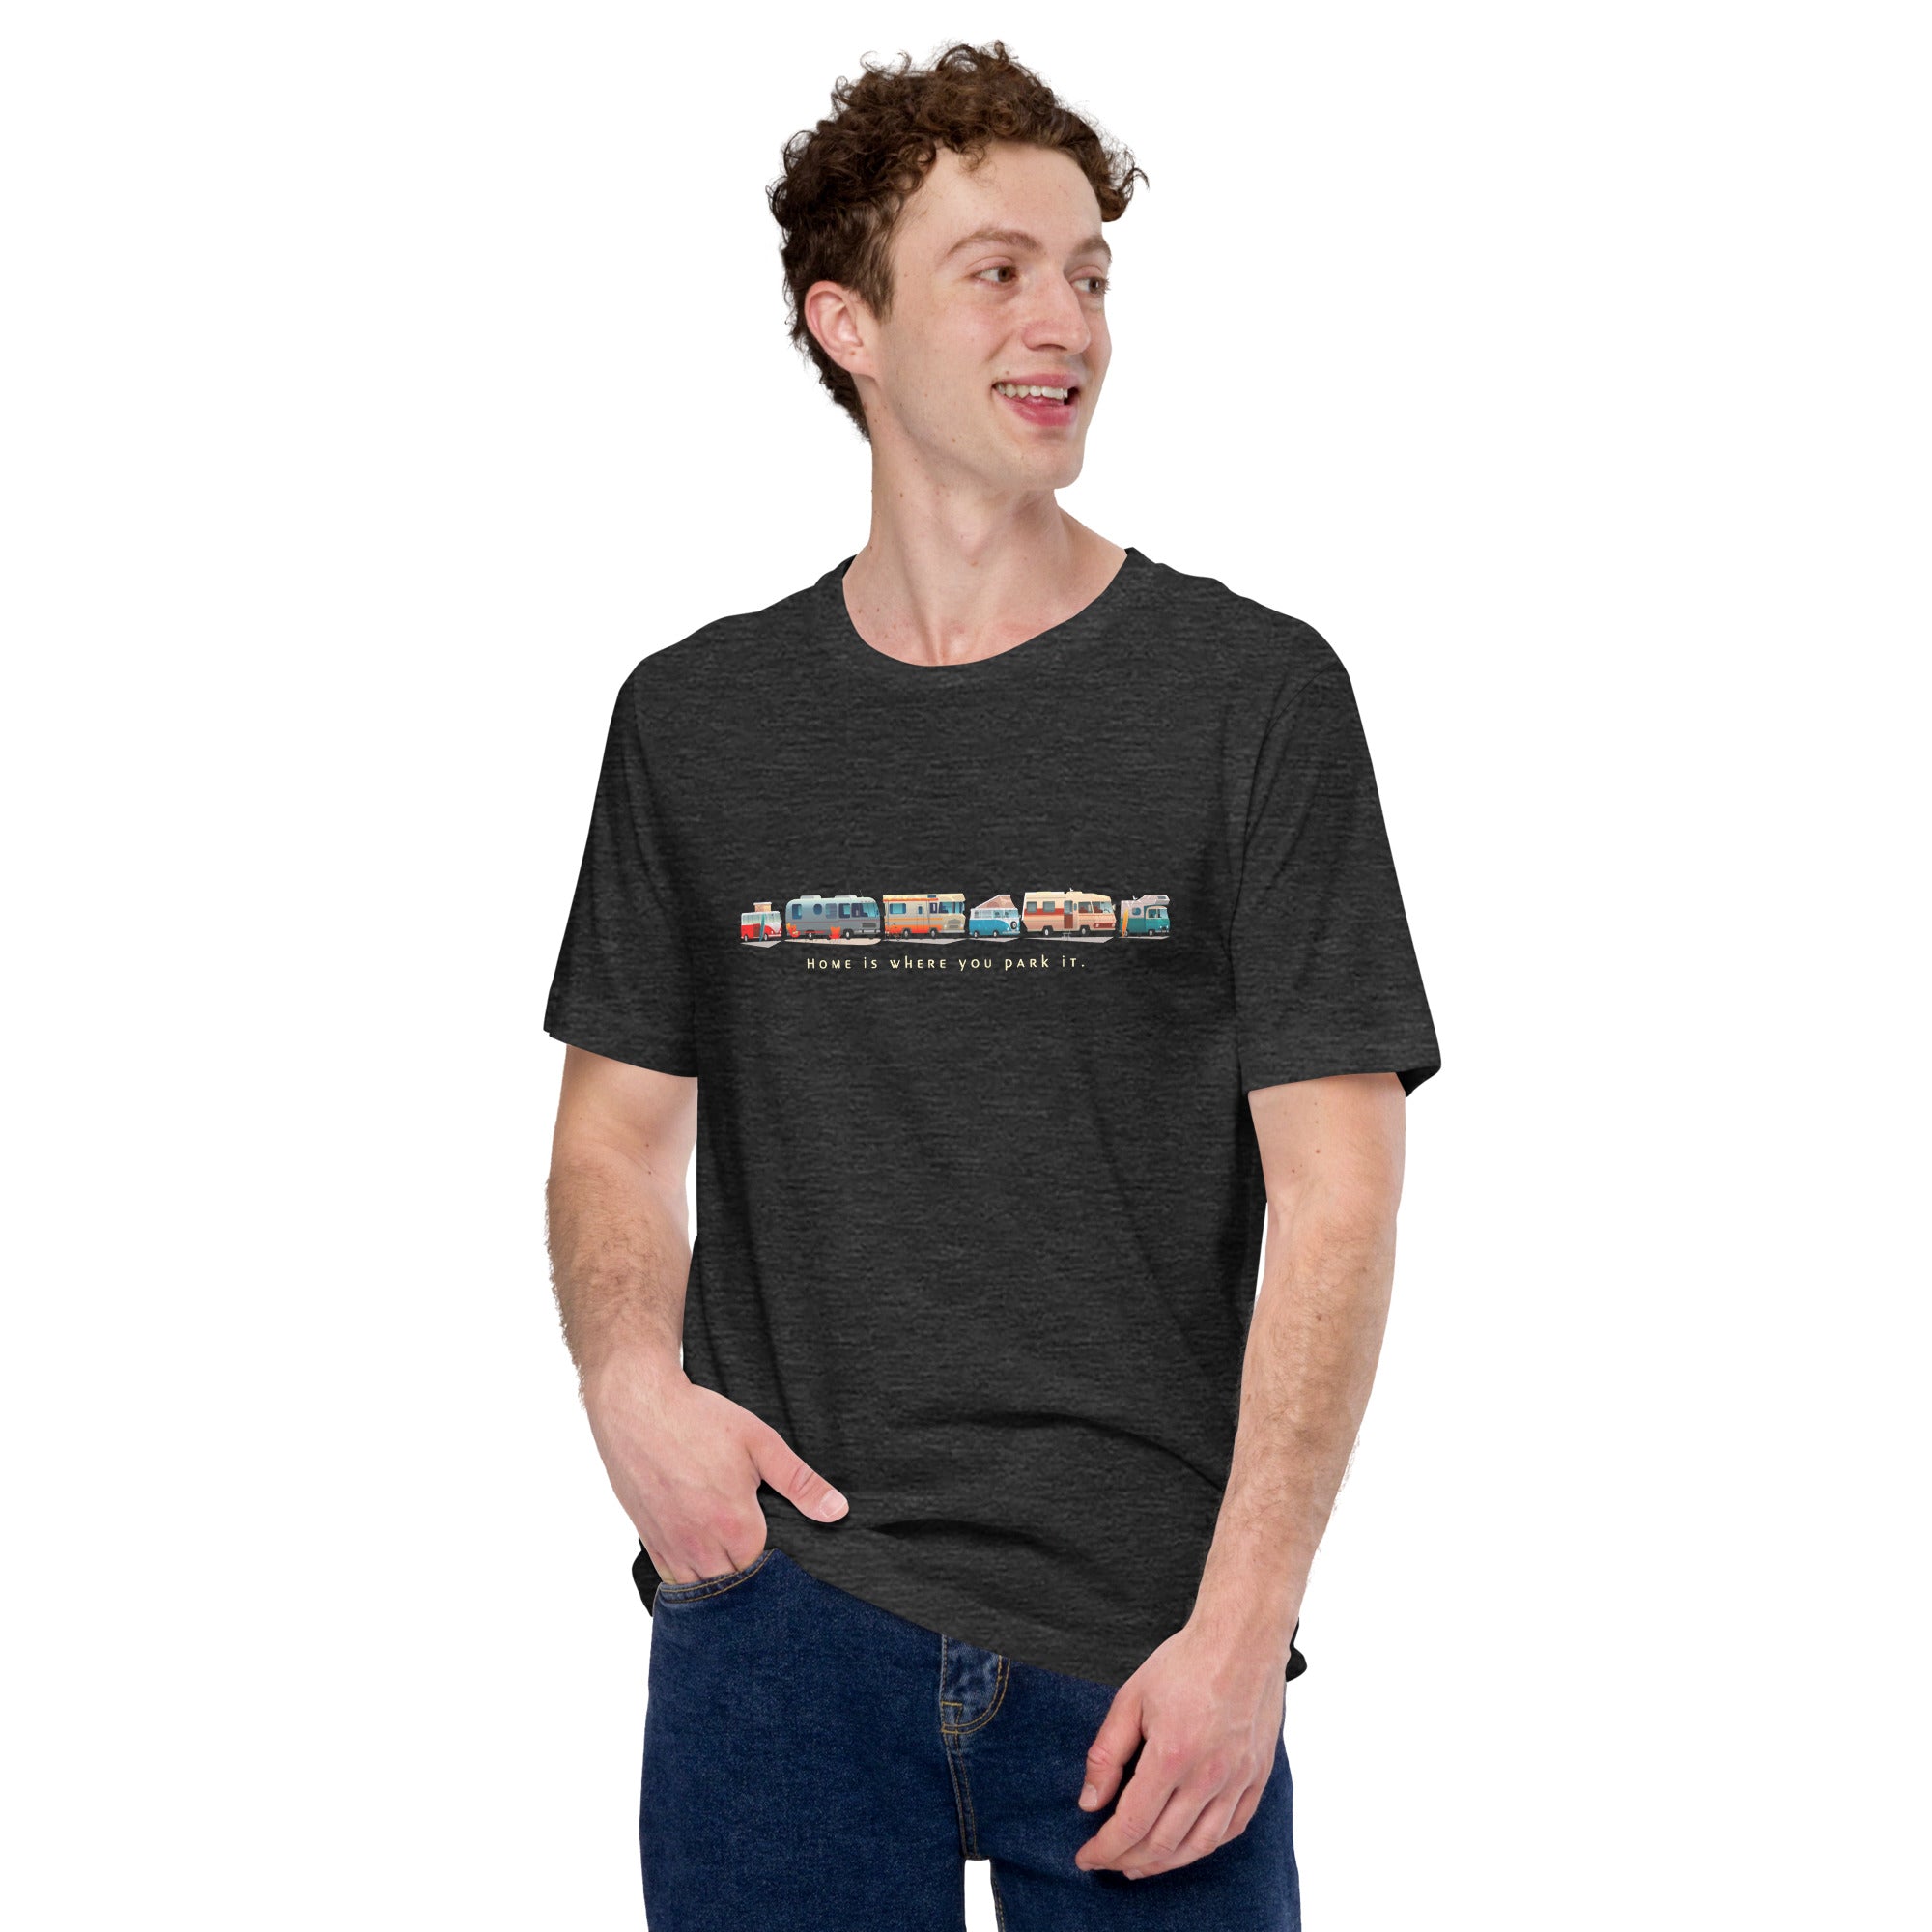 Unisex t-shirt Vintage Campers: Home is where you park it on dark heather colors